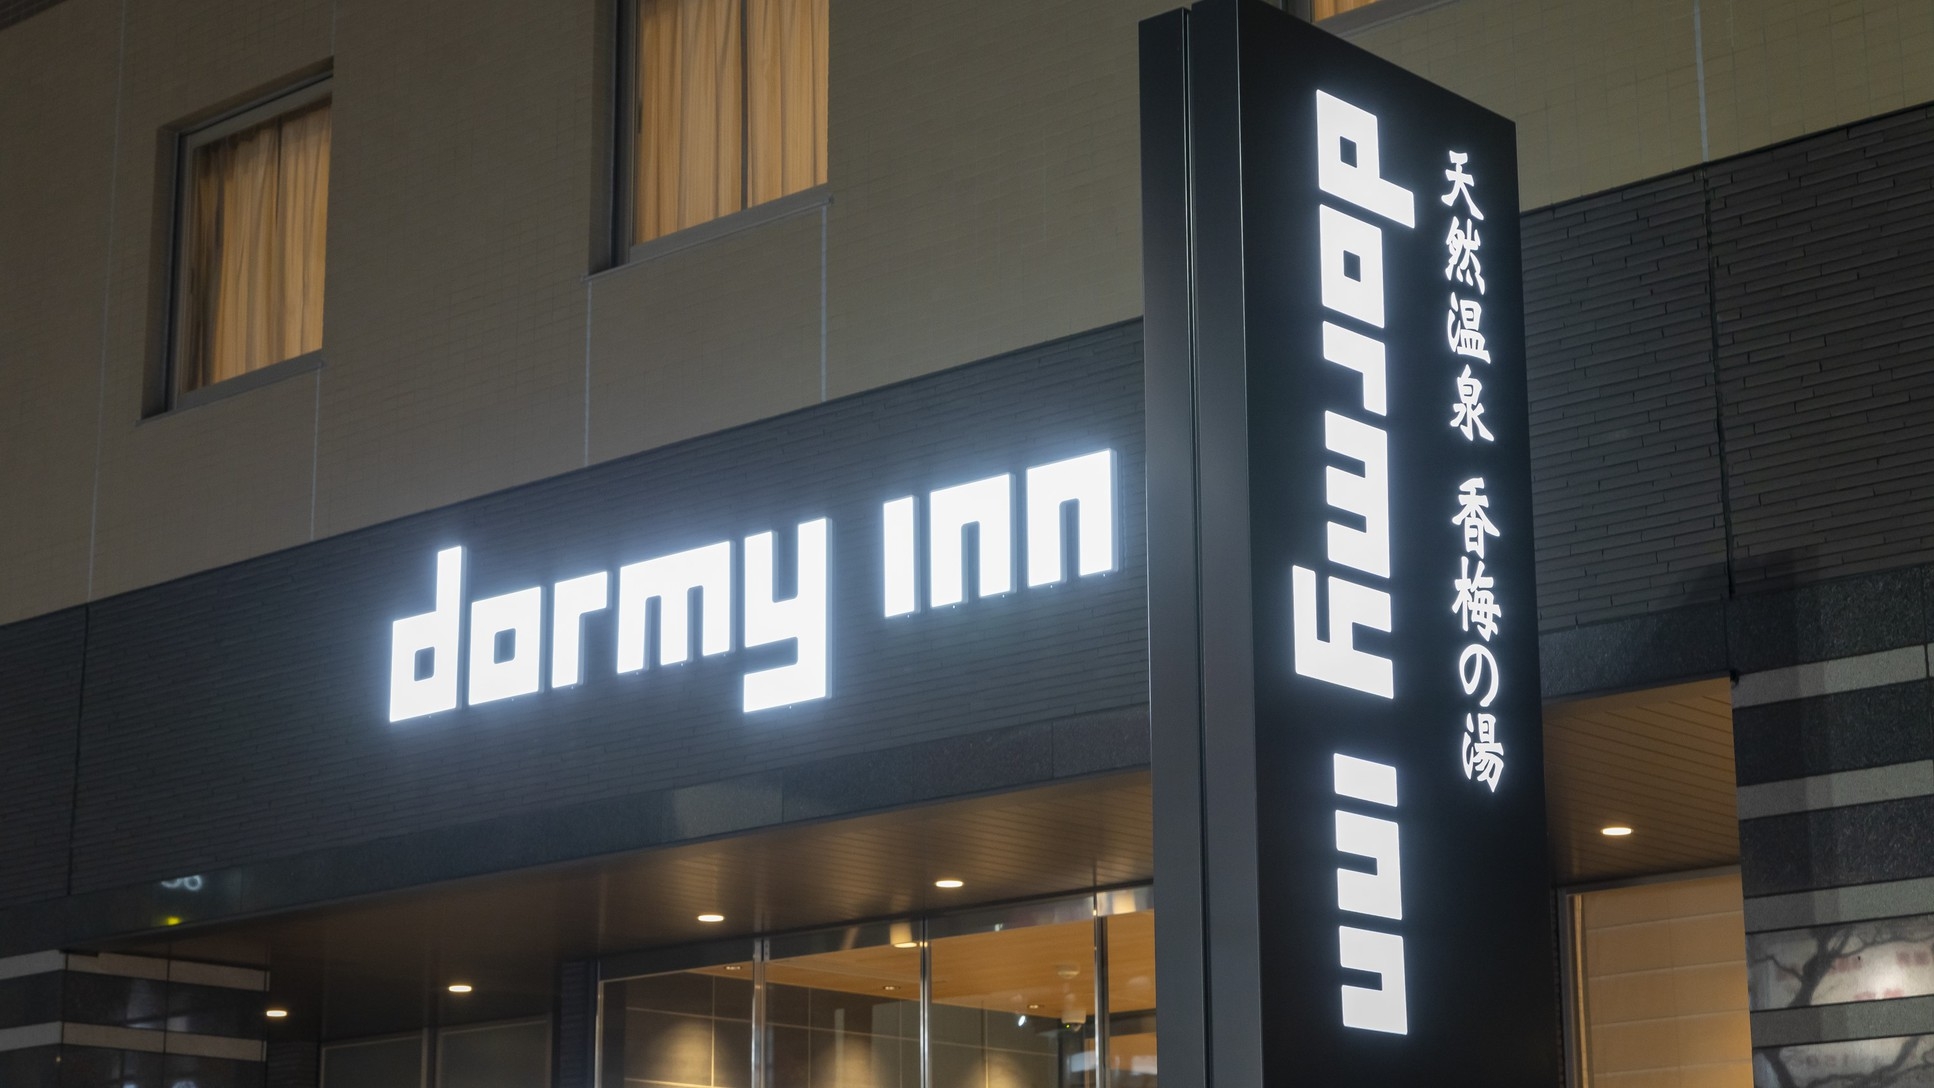 【WORK PLACE DORMY】マンスリープラン（30〜31泊）≪朝食付き≫